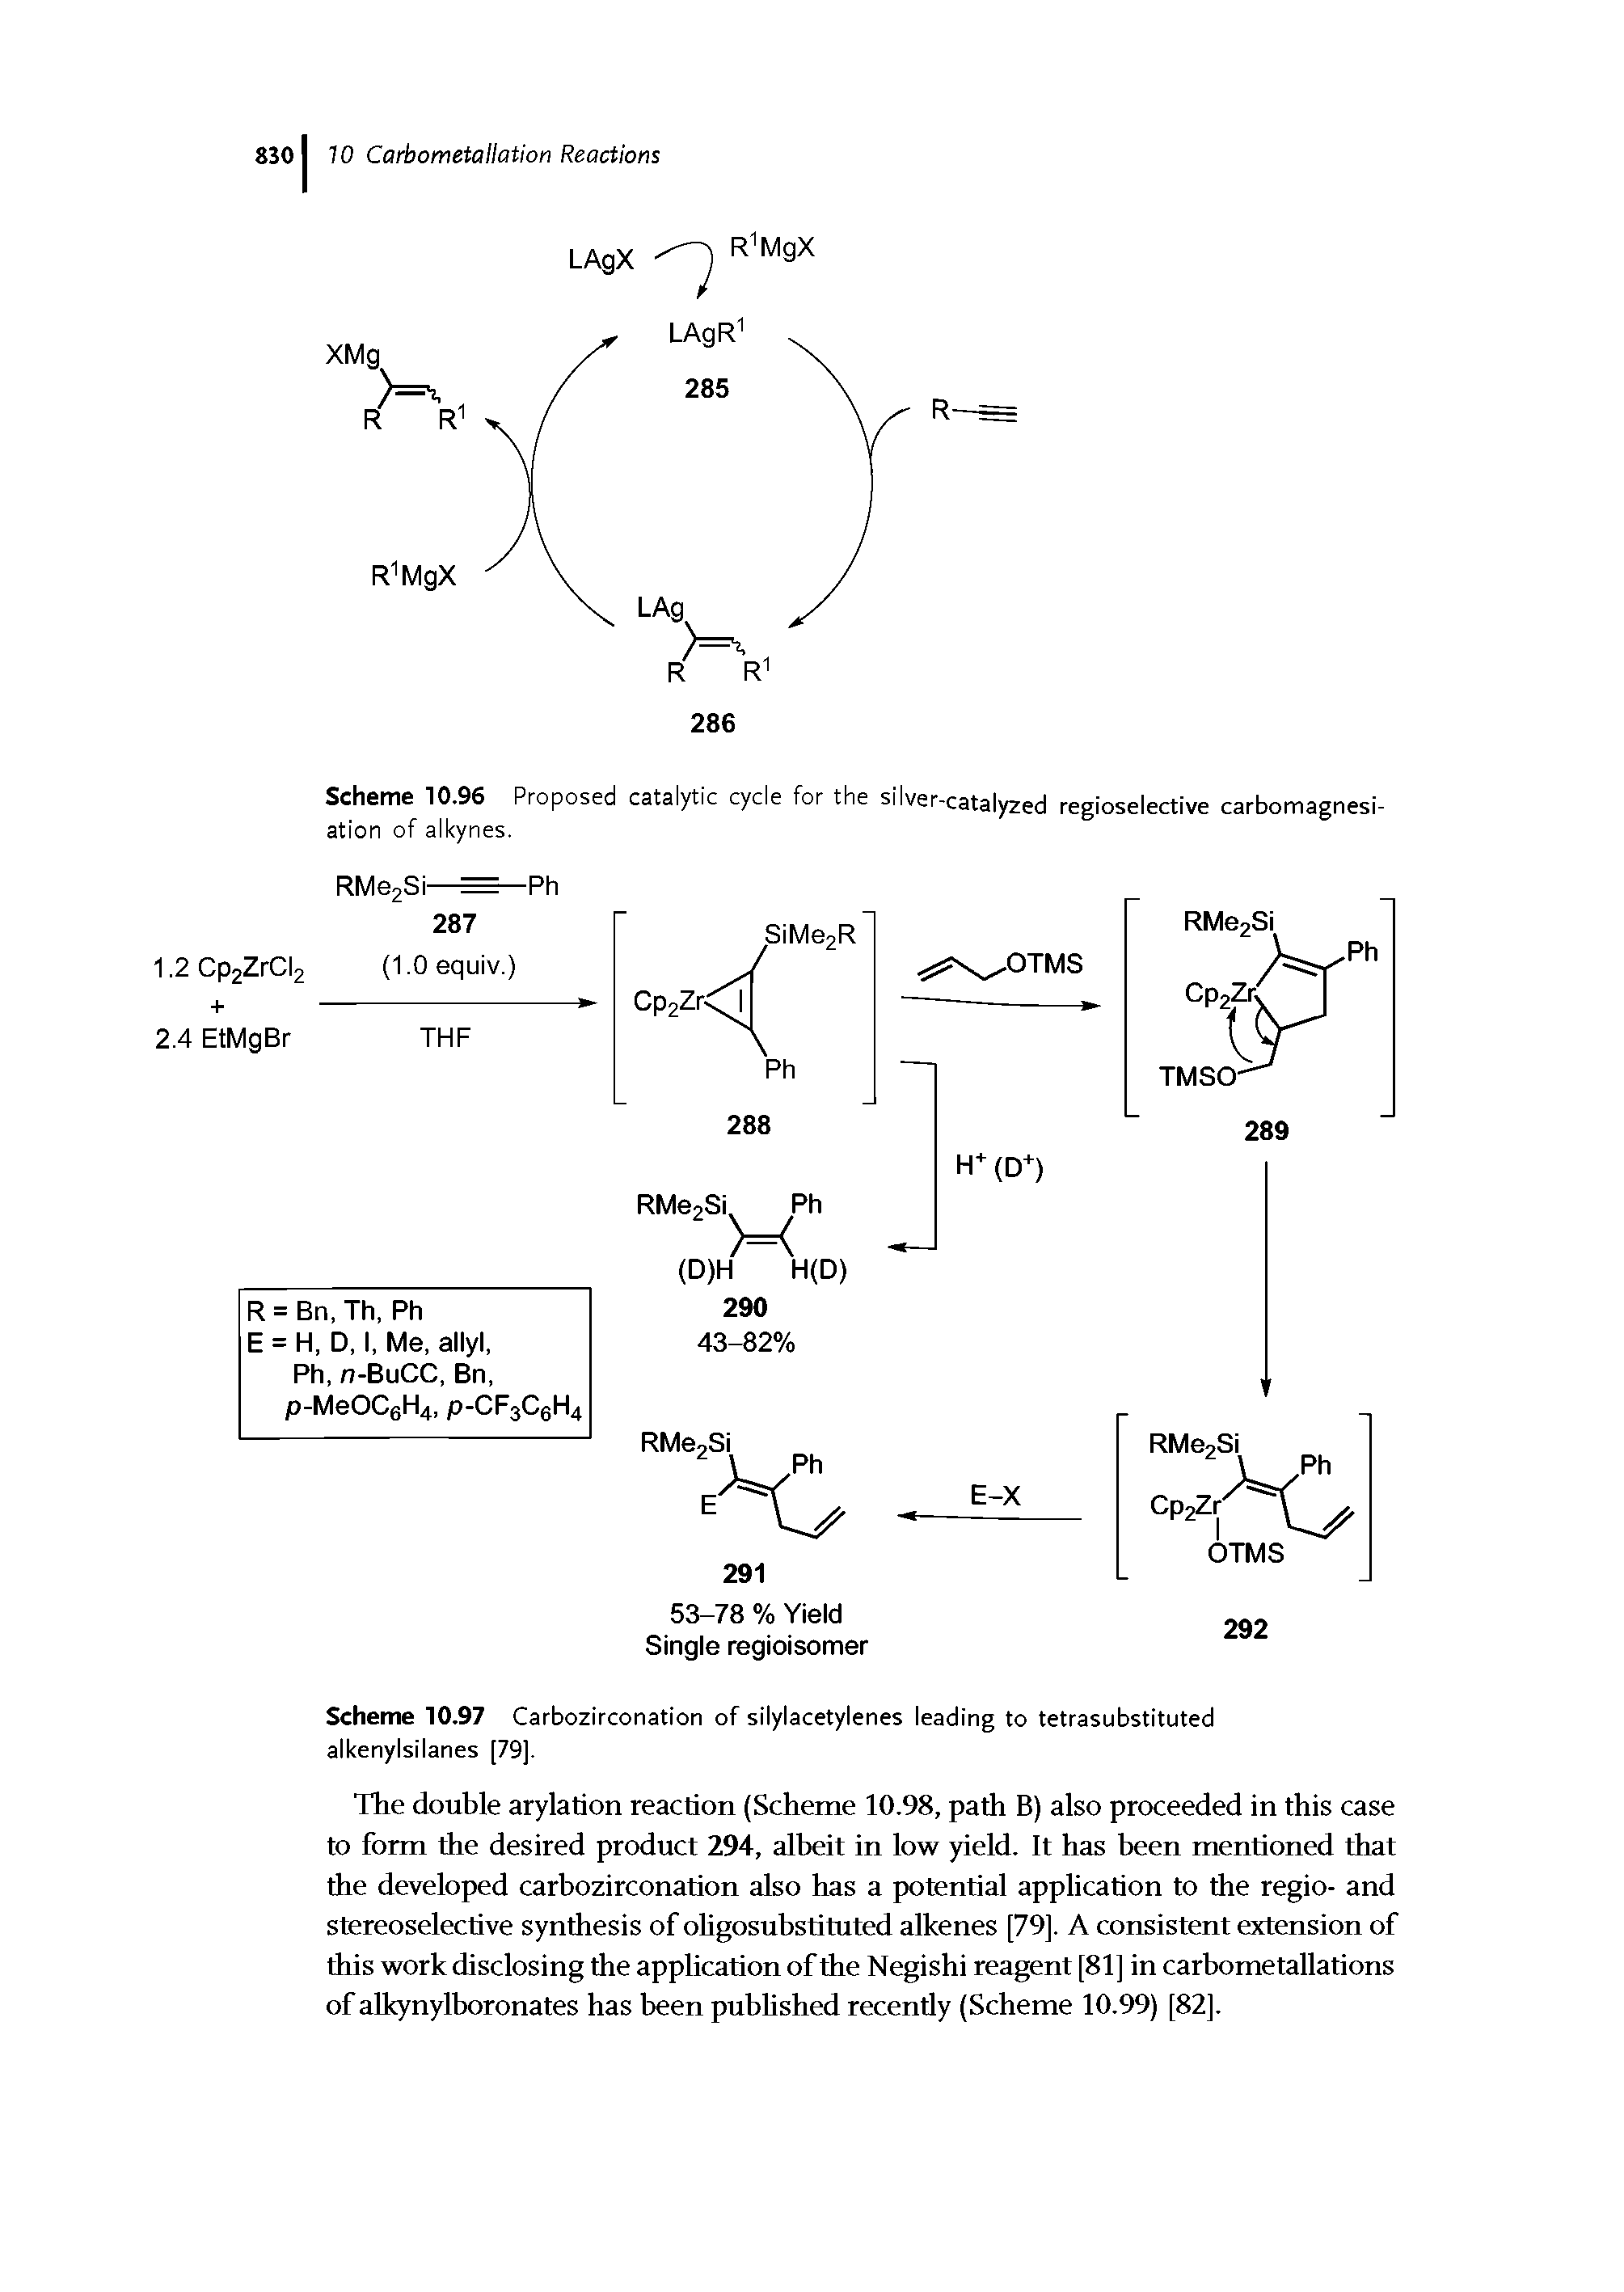 Scheme 10.96 Proposed catalytic cycle for the silver-catalyzed regioselective carbomagnesi-ation of alkynes.